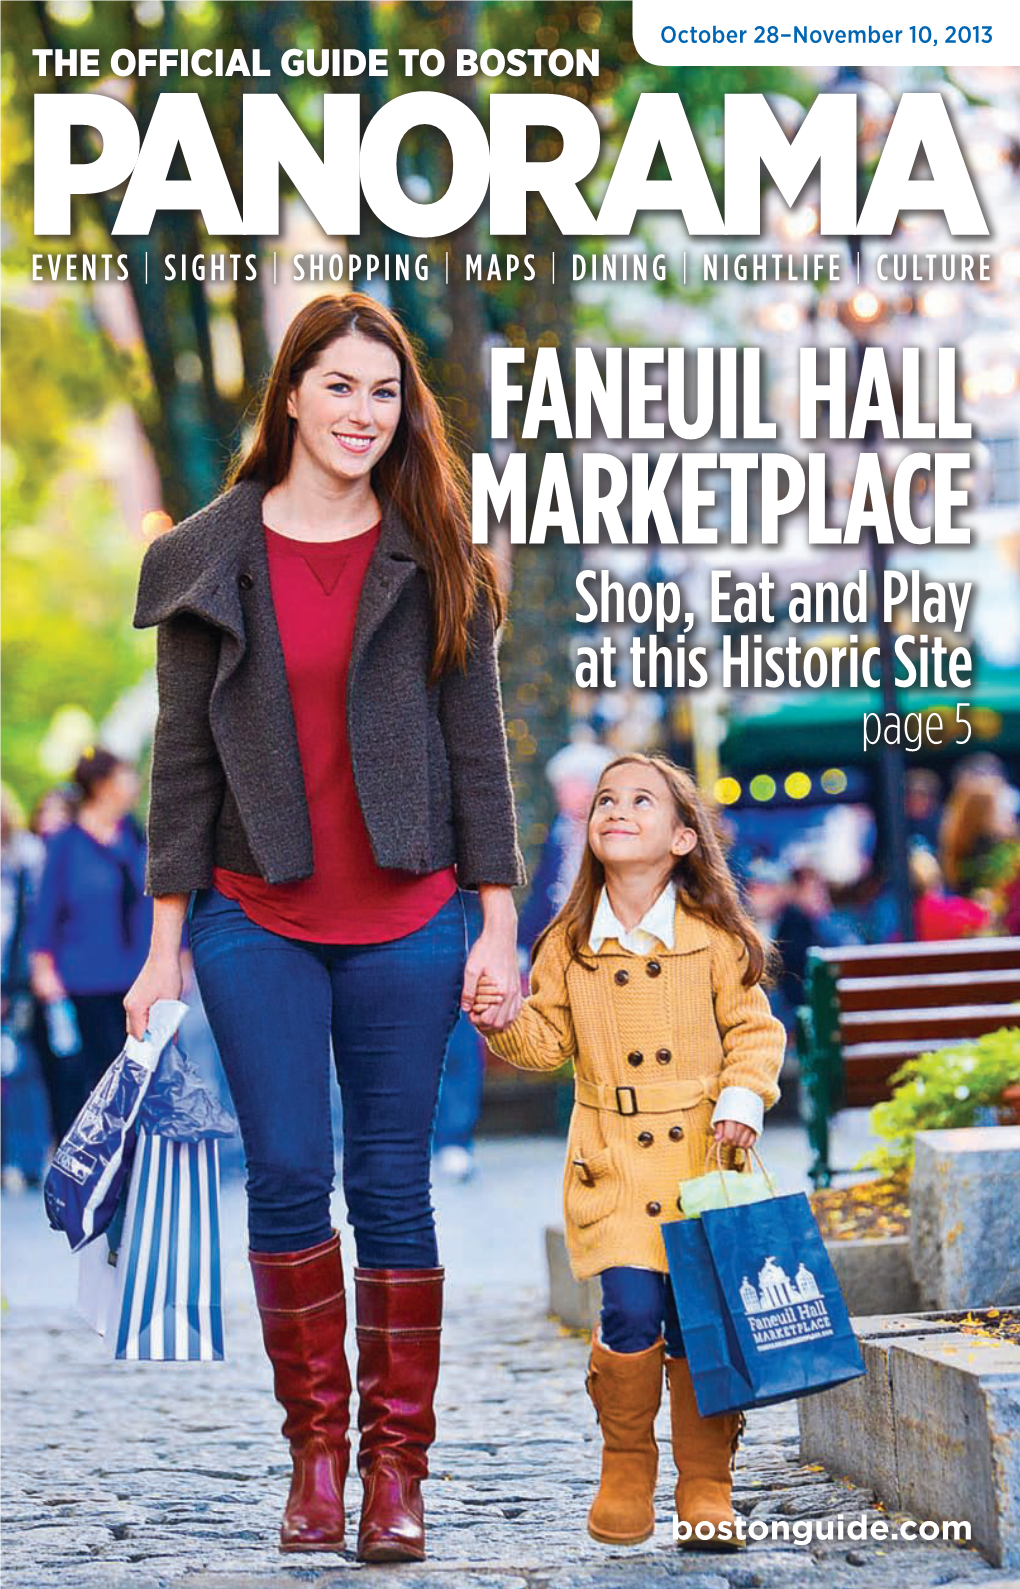 Faneuil Hall Marketplace Shop, Eat and Play at This Historic Site Page 5